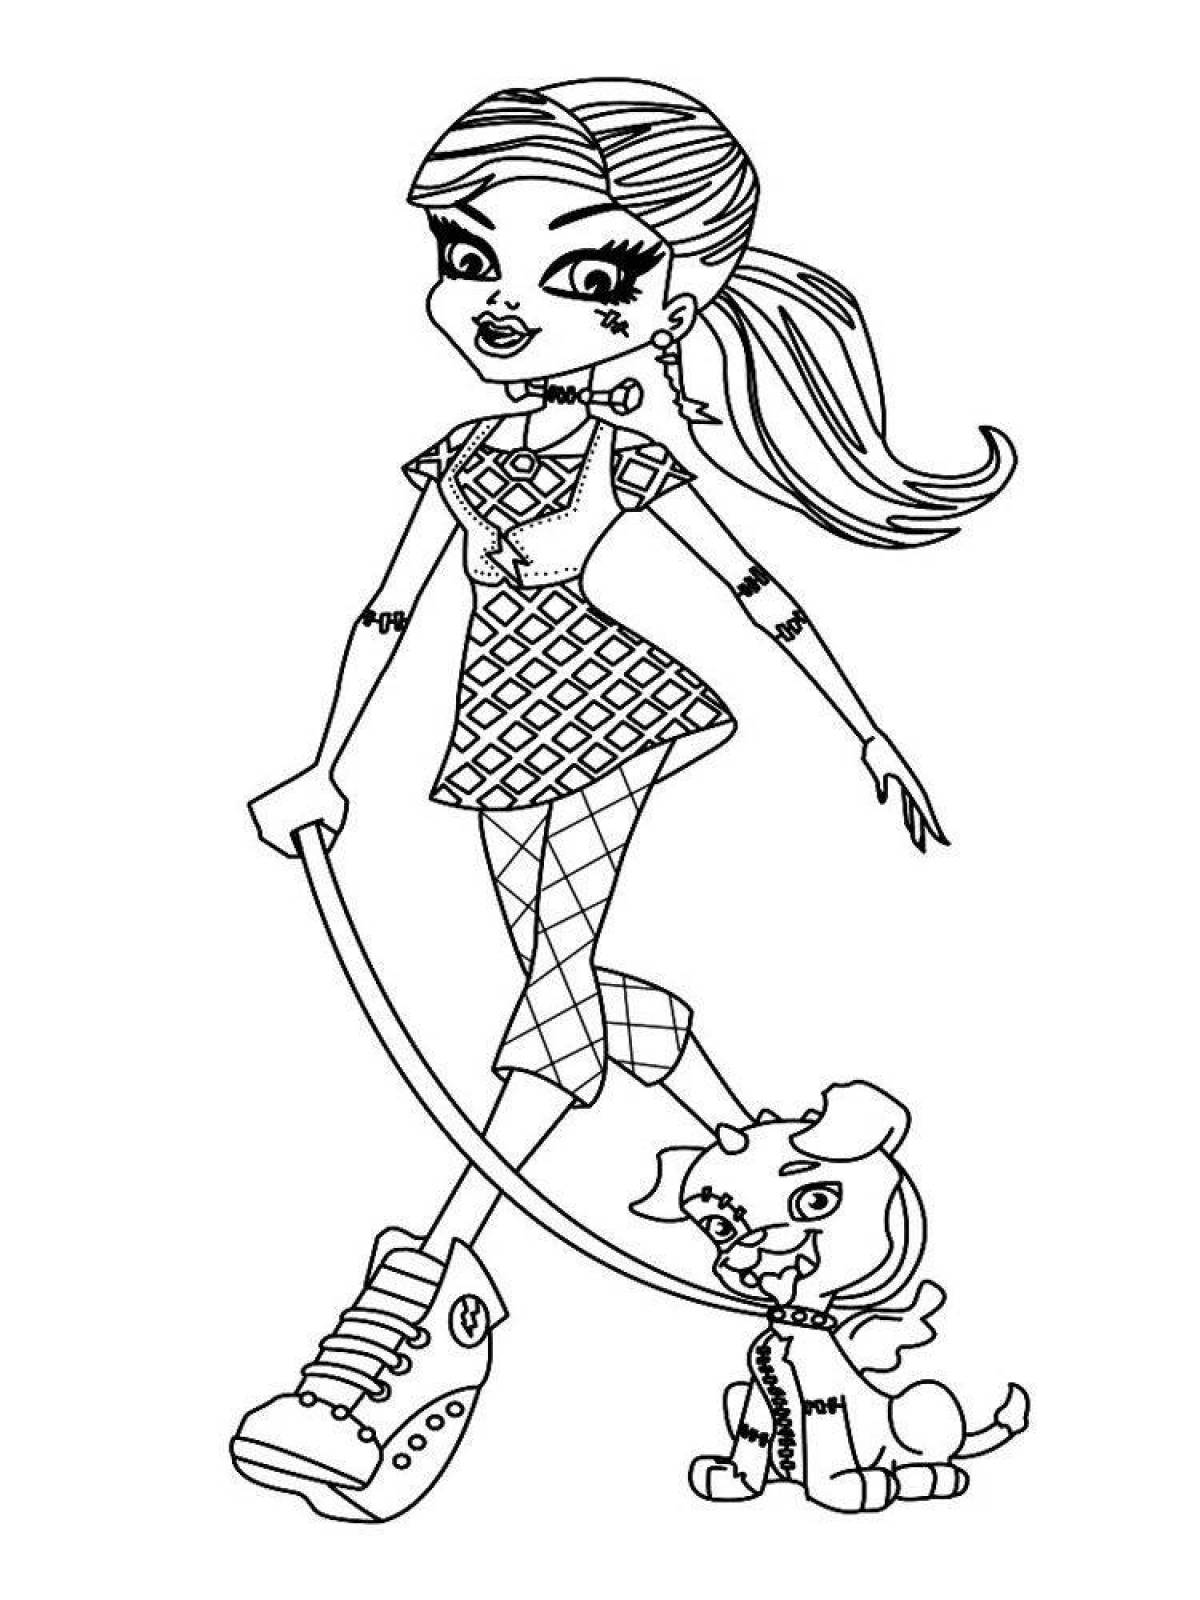 Joyful monster high coloring page